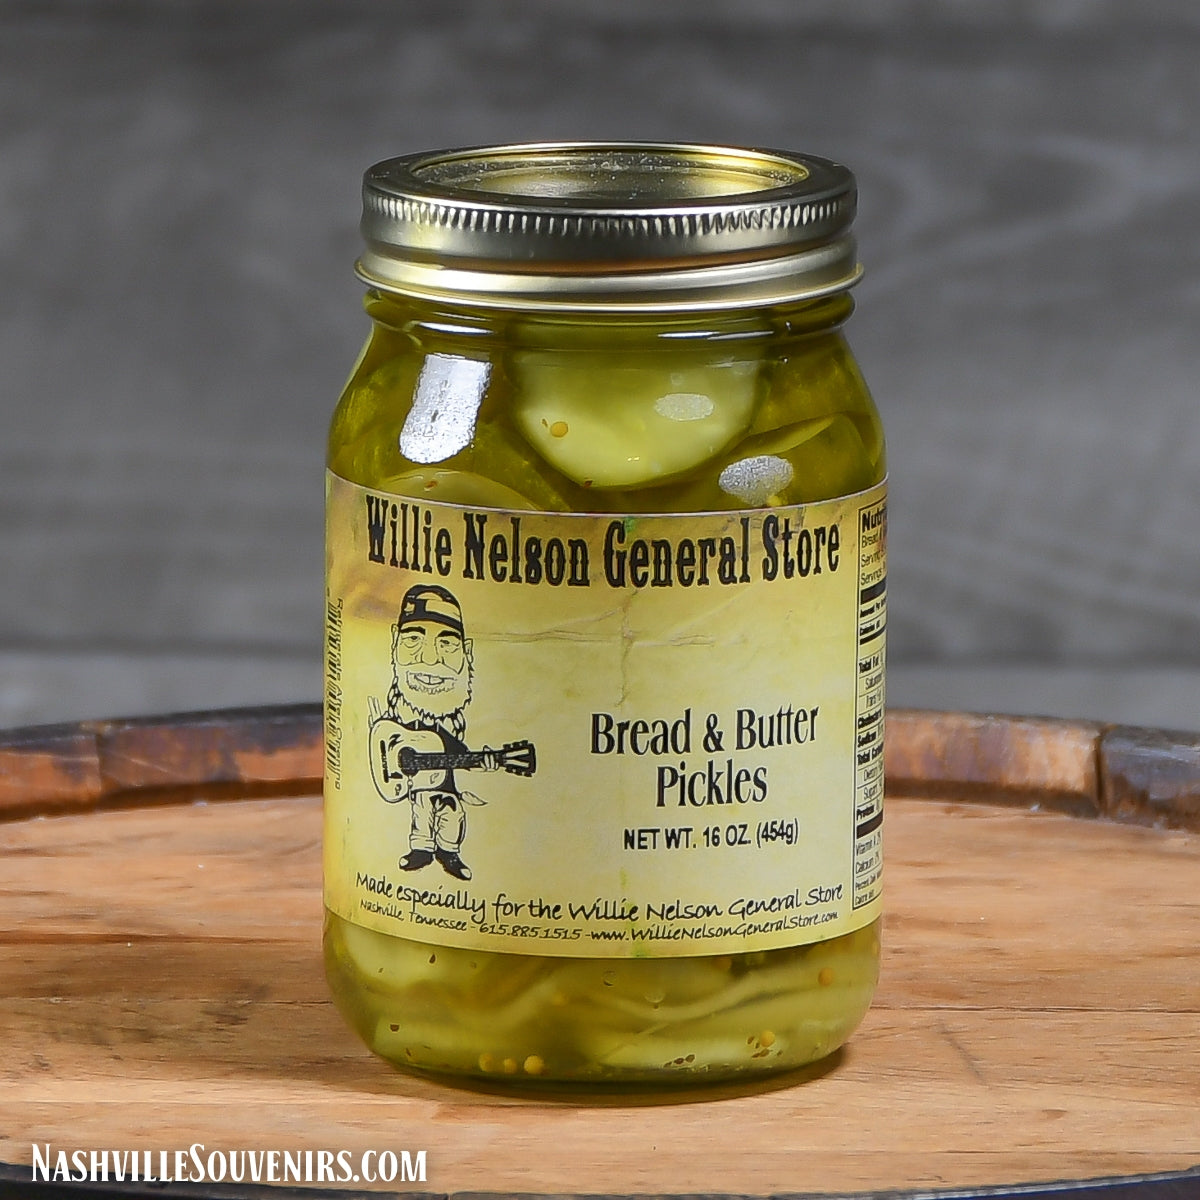 Willie Nelson General Store Bread and Butter Pickles